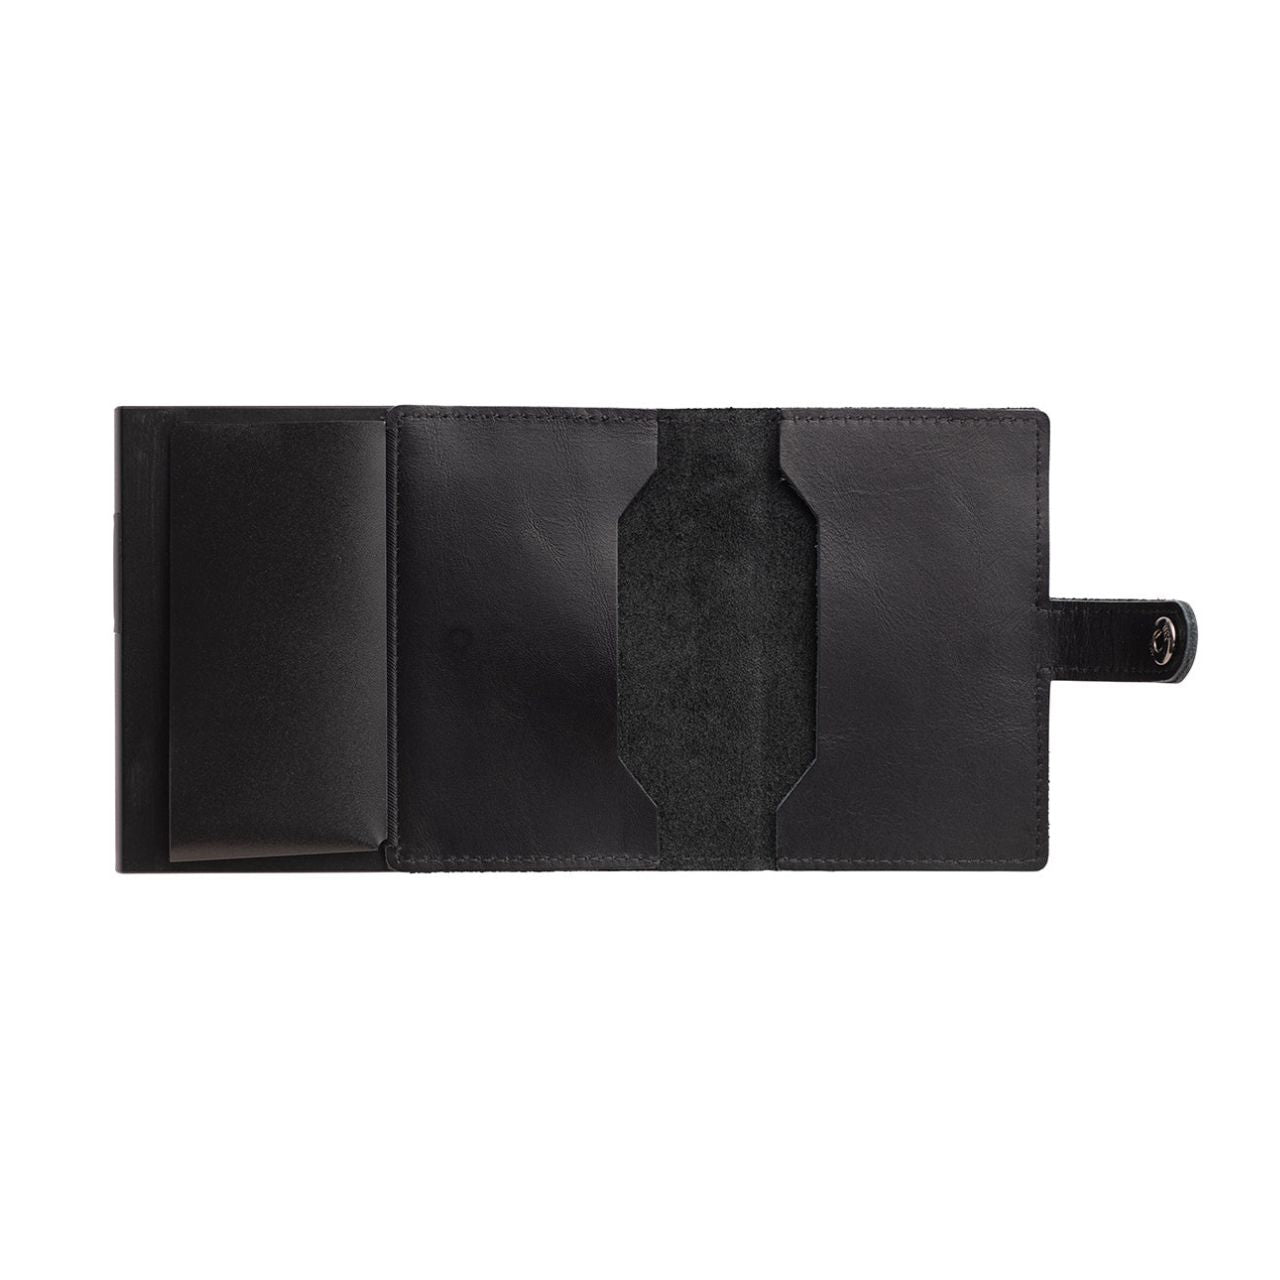 Black Leather Card Holder Wallet  Embrace elegance with our Black Leather Card Holder Wallet. Designed for the modern man on the go, it combines practicality with a refined aesthetic. Your cards have never looked better.